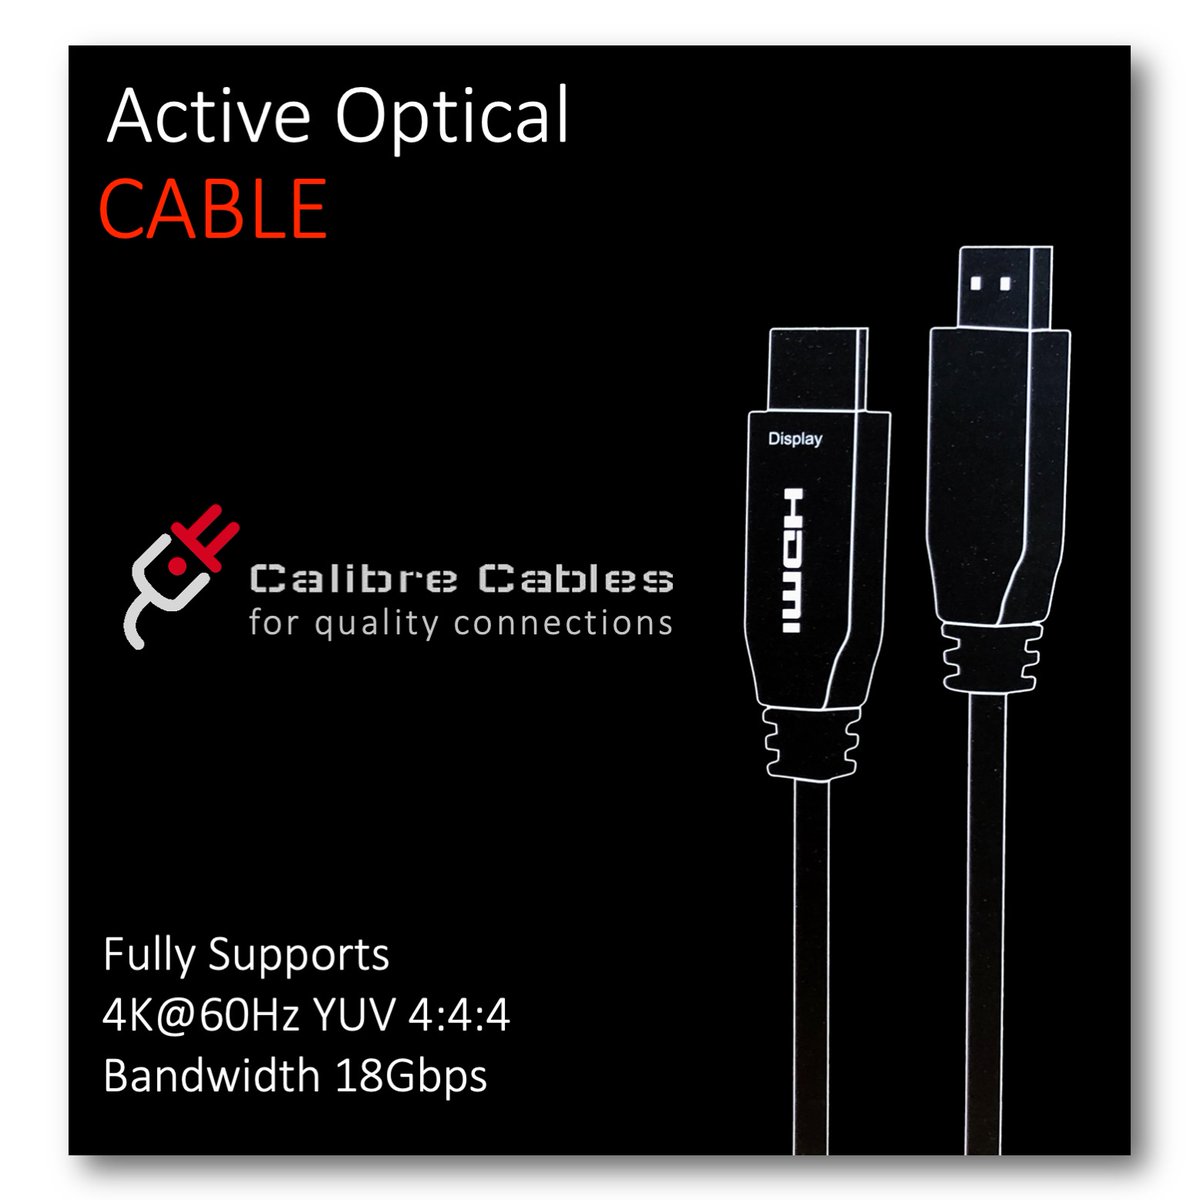 Serious Fibre Optic HDMI v2.0 & v2.1 now available online. Arduously tested & proved for performance, durability and reliability. Ideal for installation and live events. German technology chipsets. New flexible fibre polymer quad core with 5v #avinstaller #churchav #eventtech